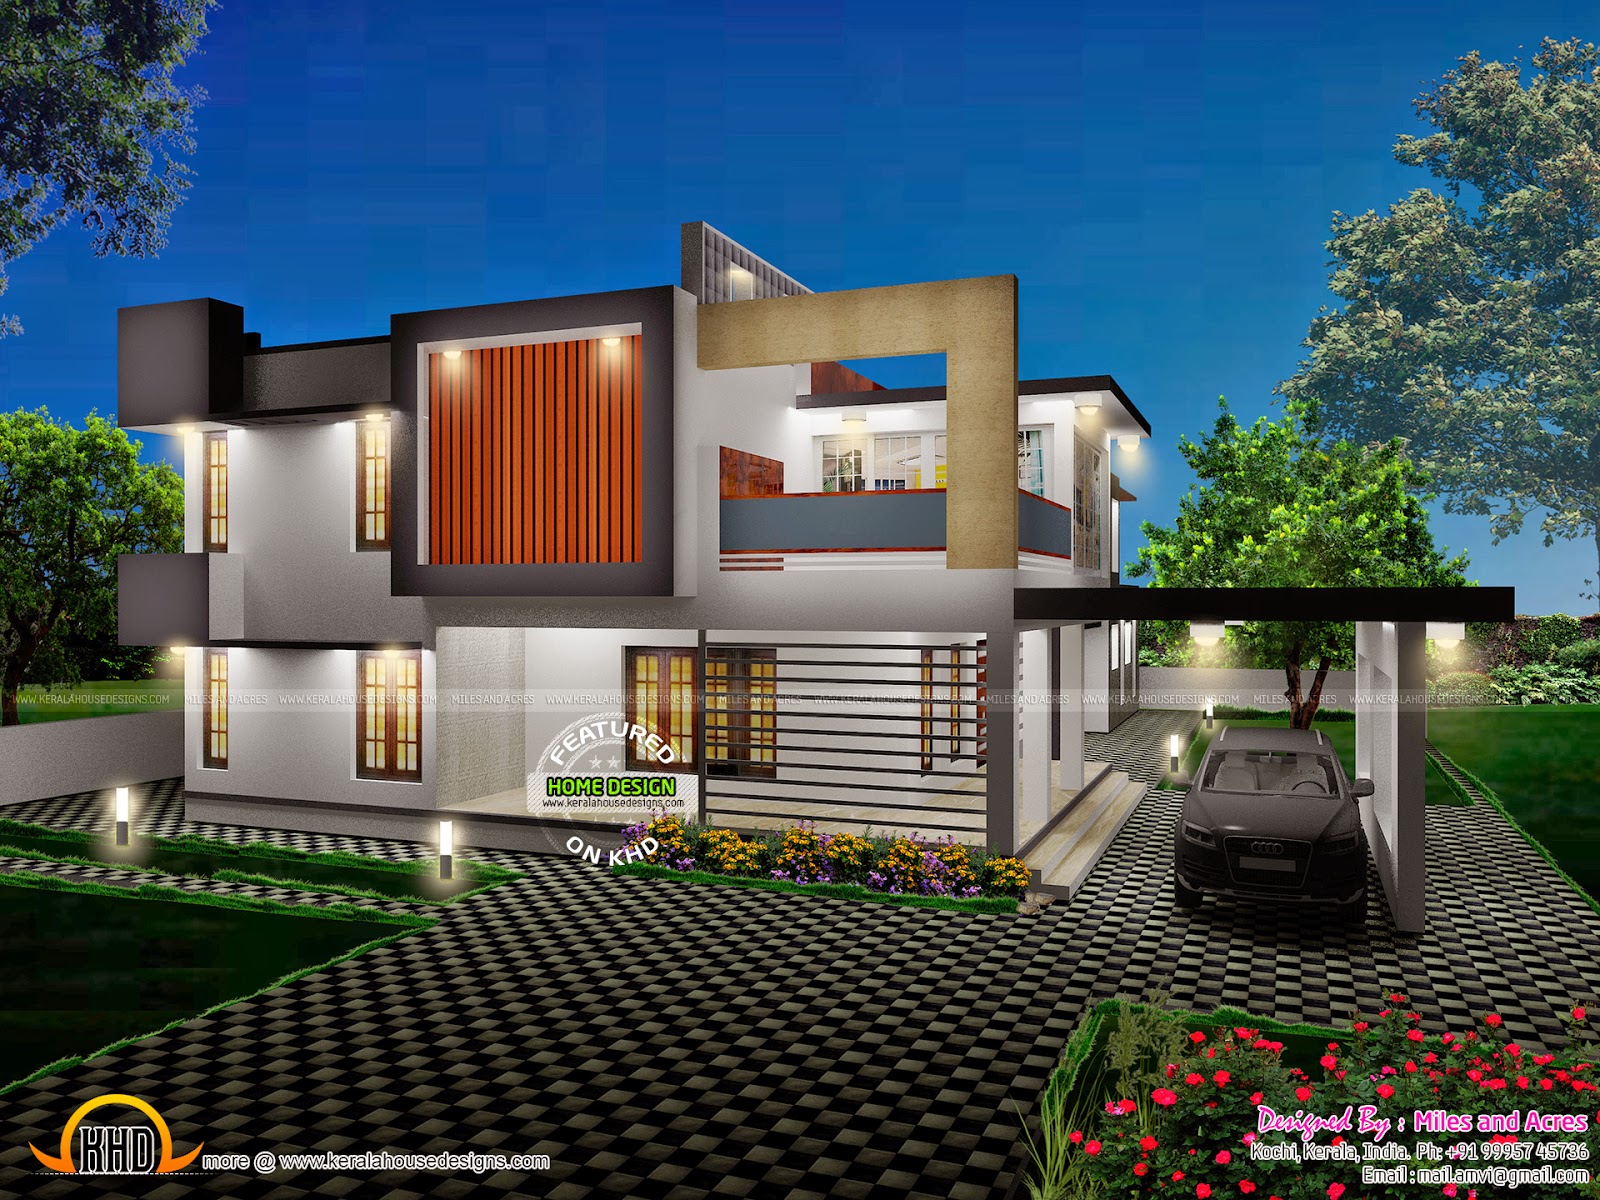  3d  view  with plan  Kerala home  design and floor plans 